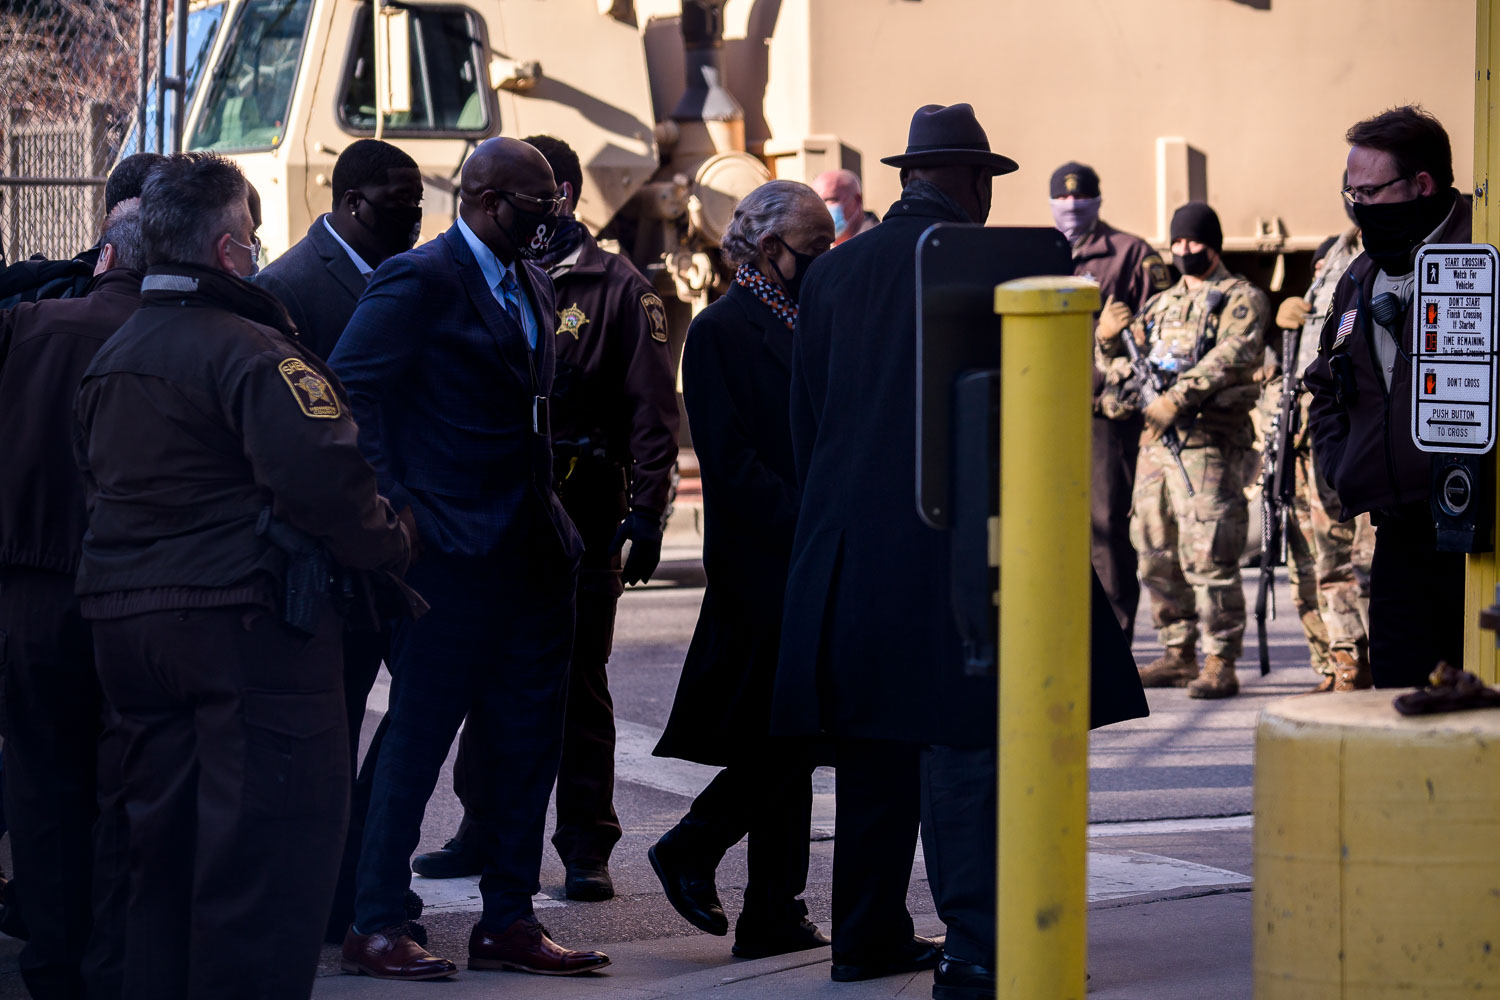 George Floyd family, their attorney Ben Crump and Rev. Al Sharpton arrive to a heavily fortified Hennepin County Government center on the day of opening statements in the murder trial of Derek Chauvin. Chauvin is charged in the May 25th murder of George Floyd.